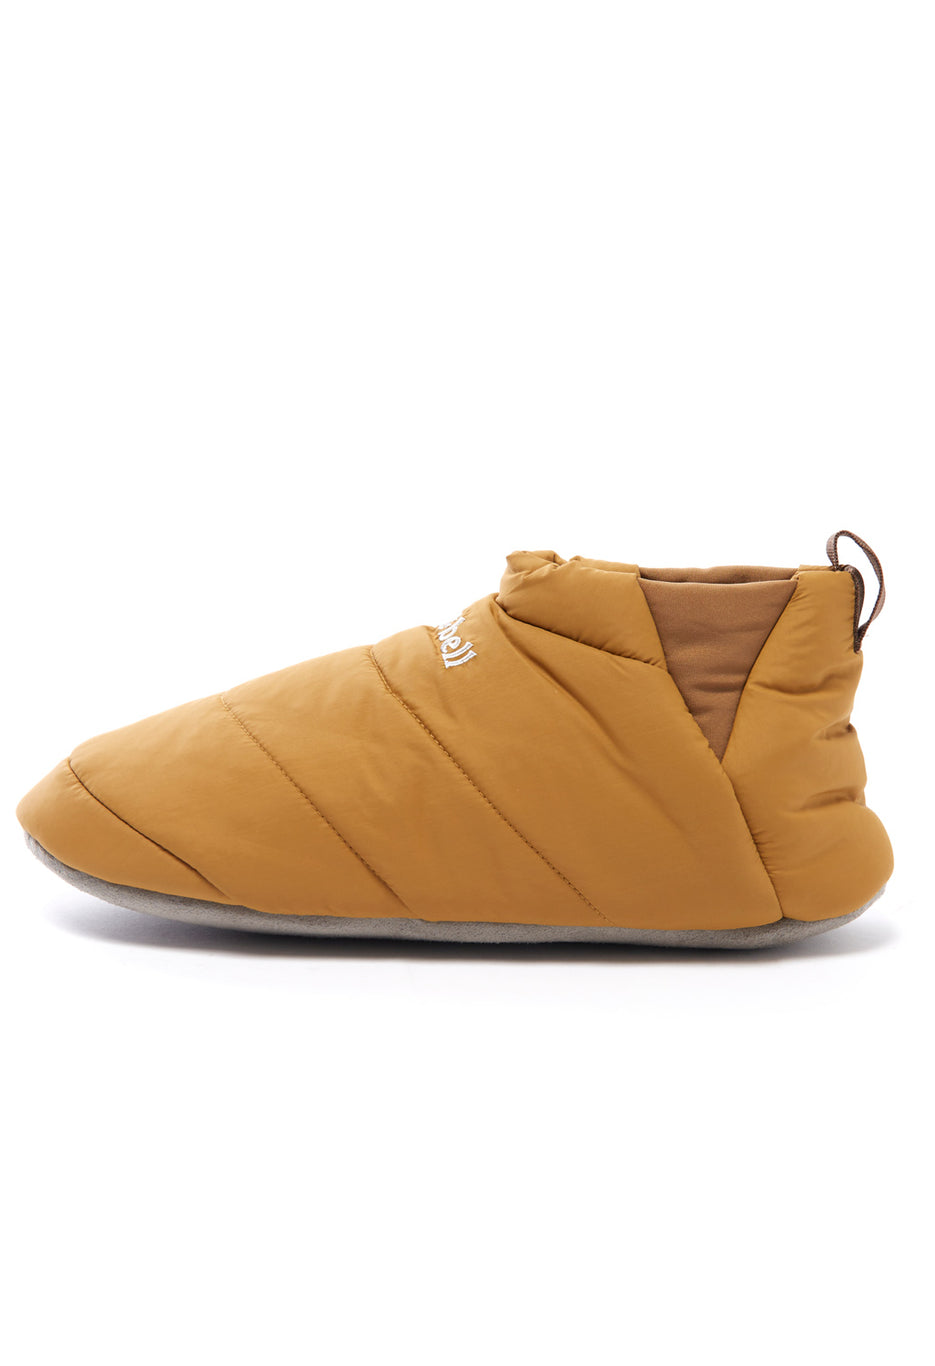 Montbell Exceloft Camp Shoes - Brown